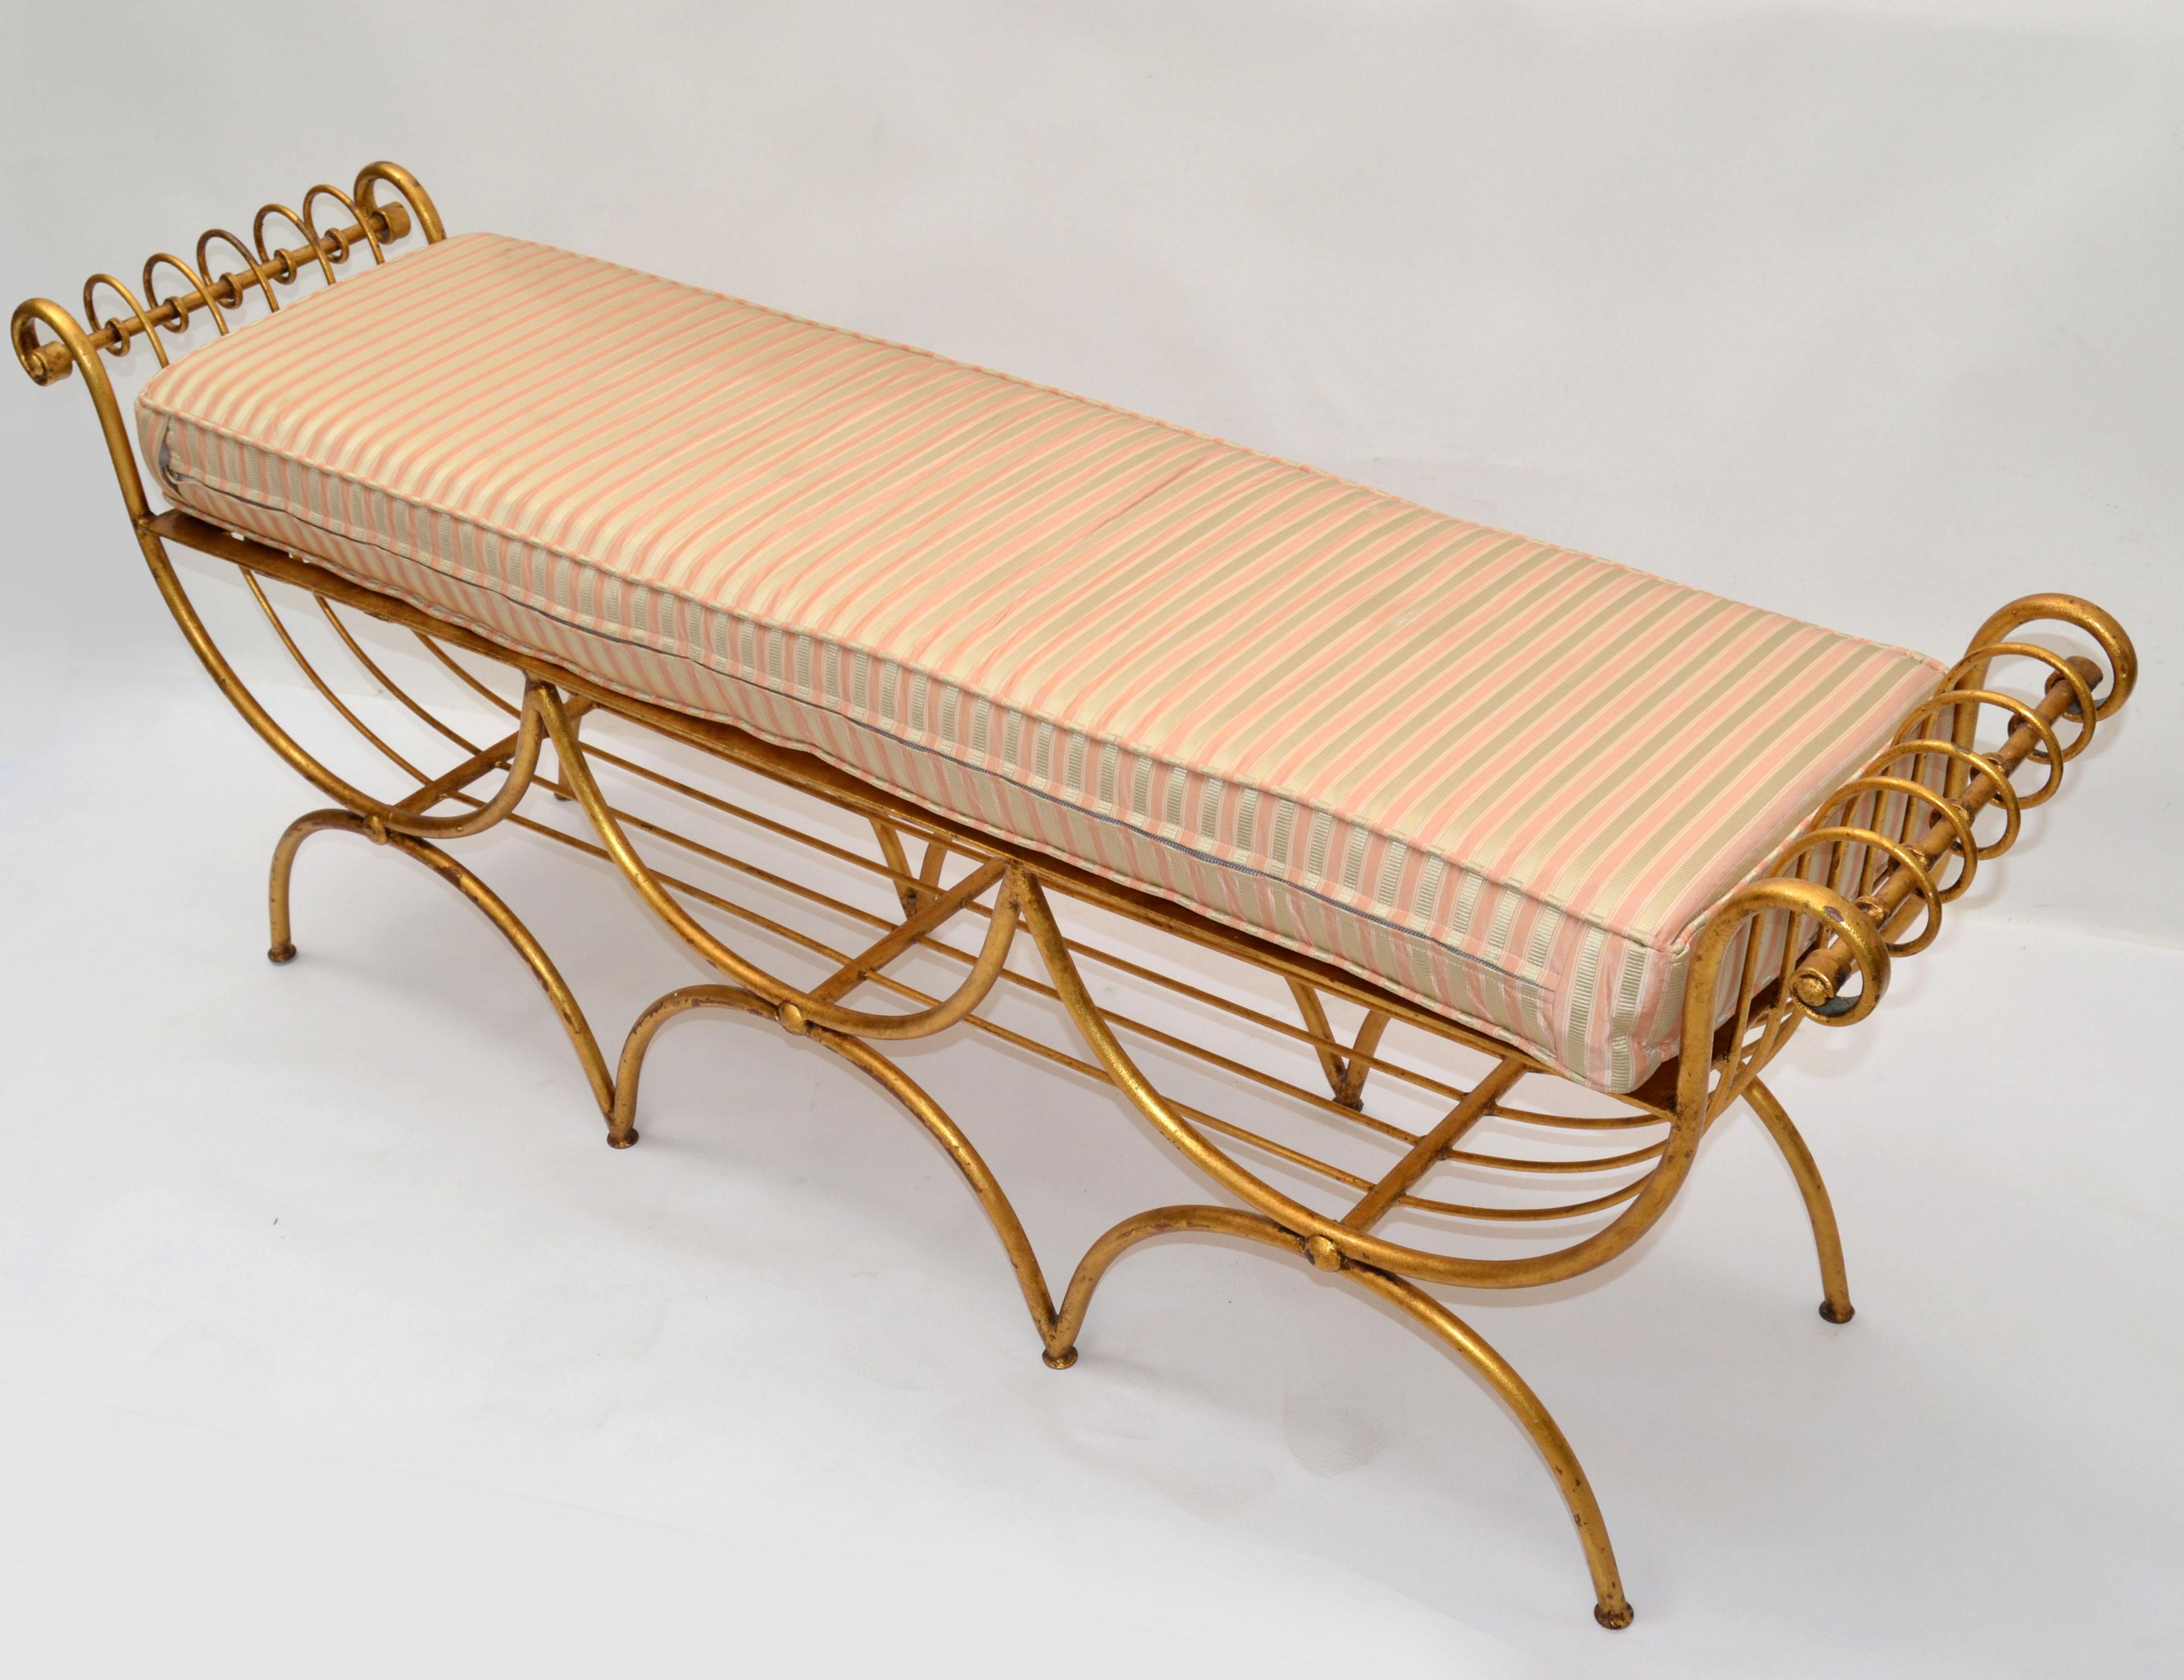 Italian Curule Gilt Wrought Iron Long Bench Original Silk Fabric Seat Cushion In Good Condition For Sale In Miami, FL